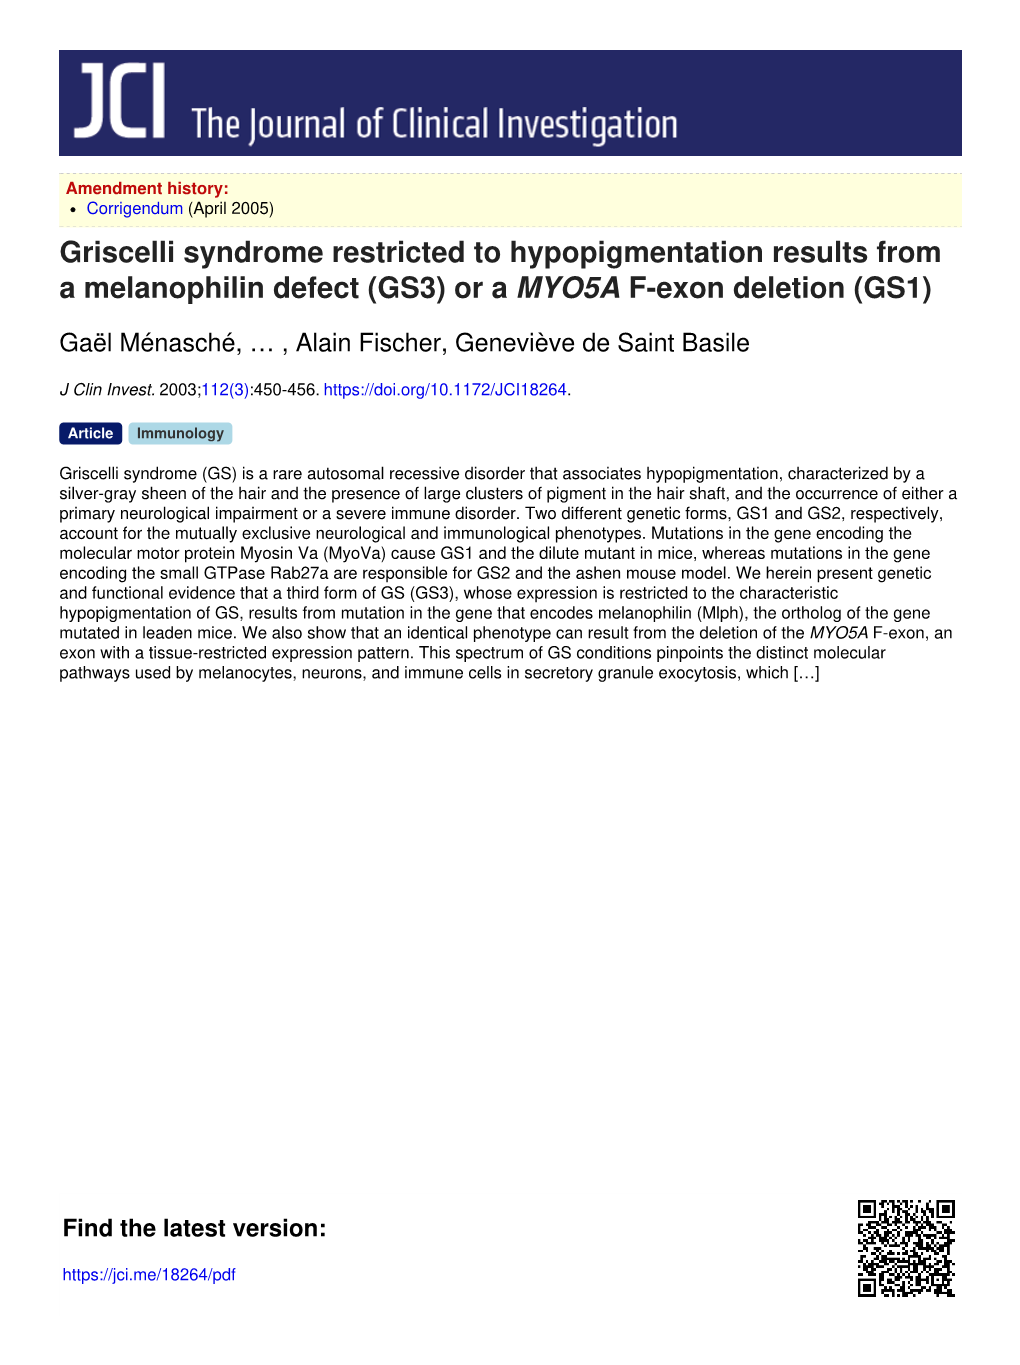 Griscelli Syndrome Restricted to Hypopigmentation Results from a Melanophilin Defect (GS3) Or a MYO5A F-Exon Deletion (GS1)